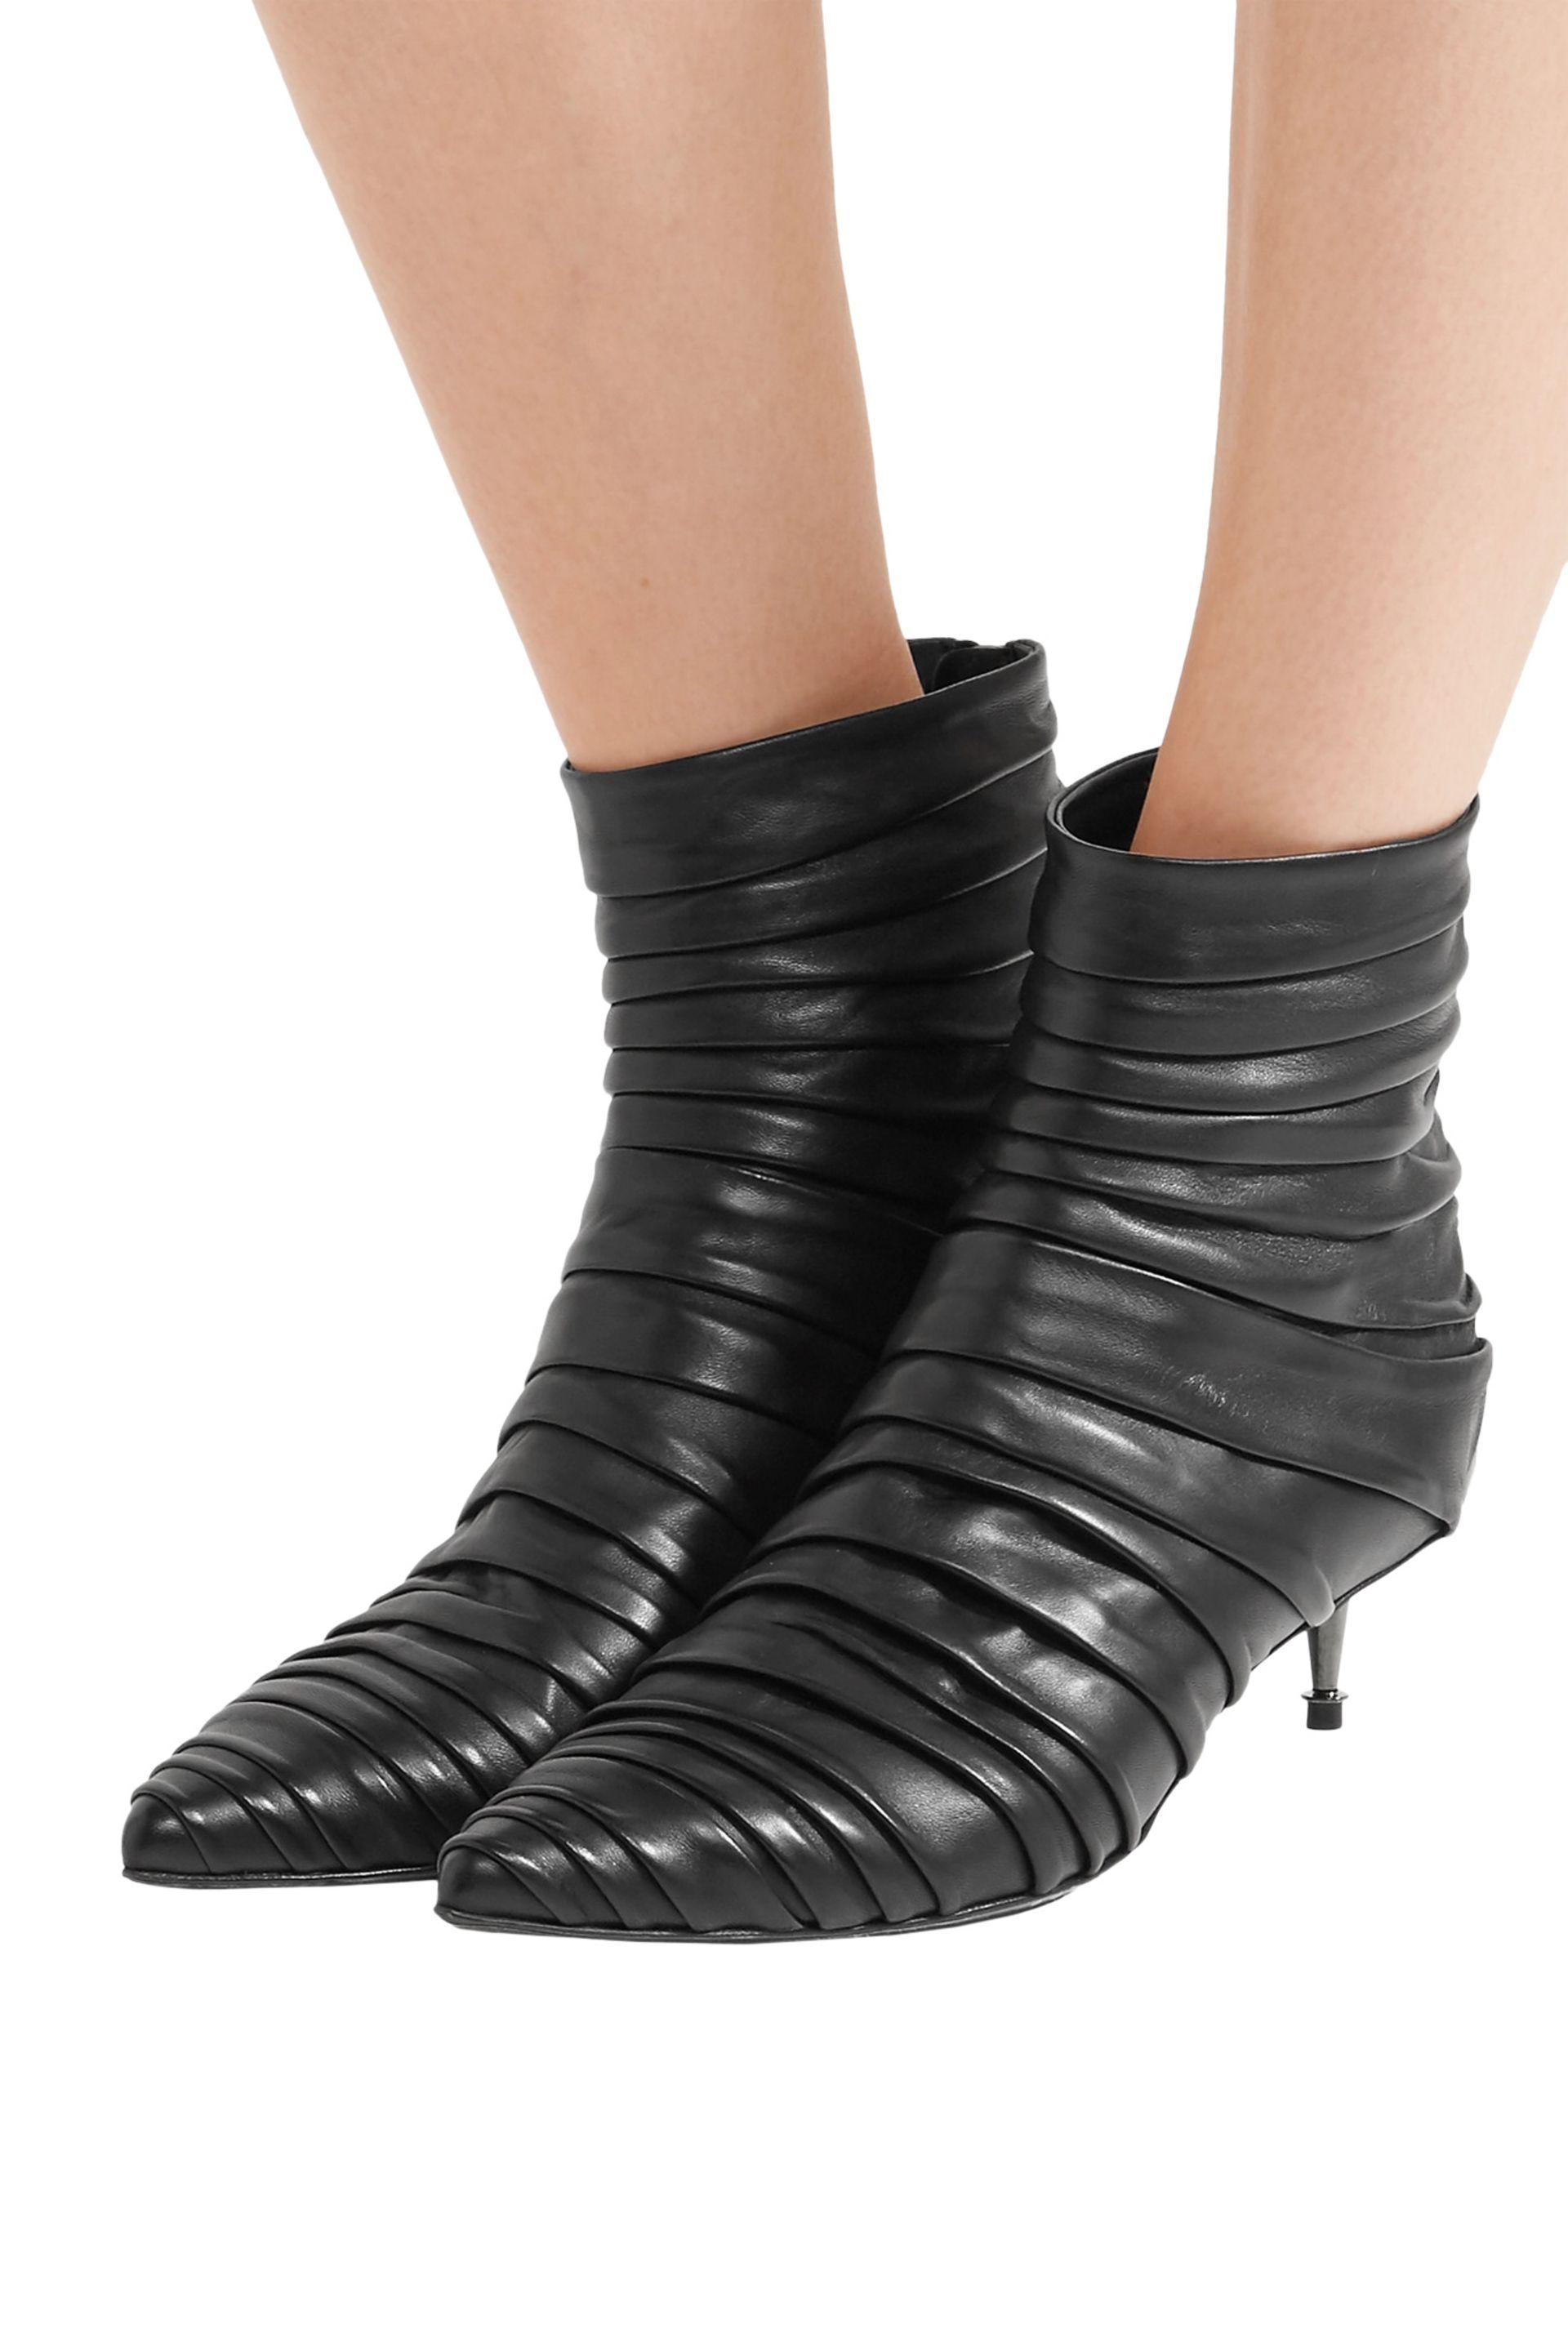 Tom Ford Ruched Leather Ankle Boots Black - Lyst